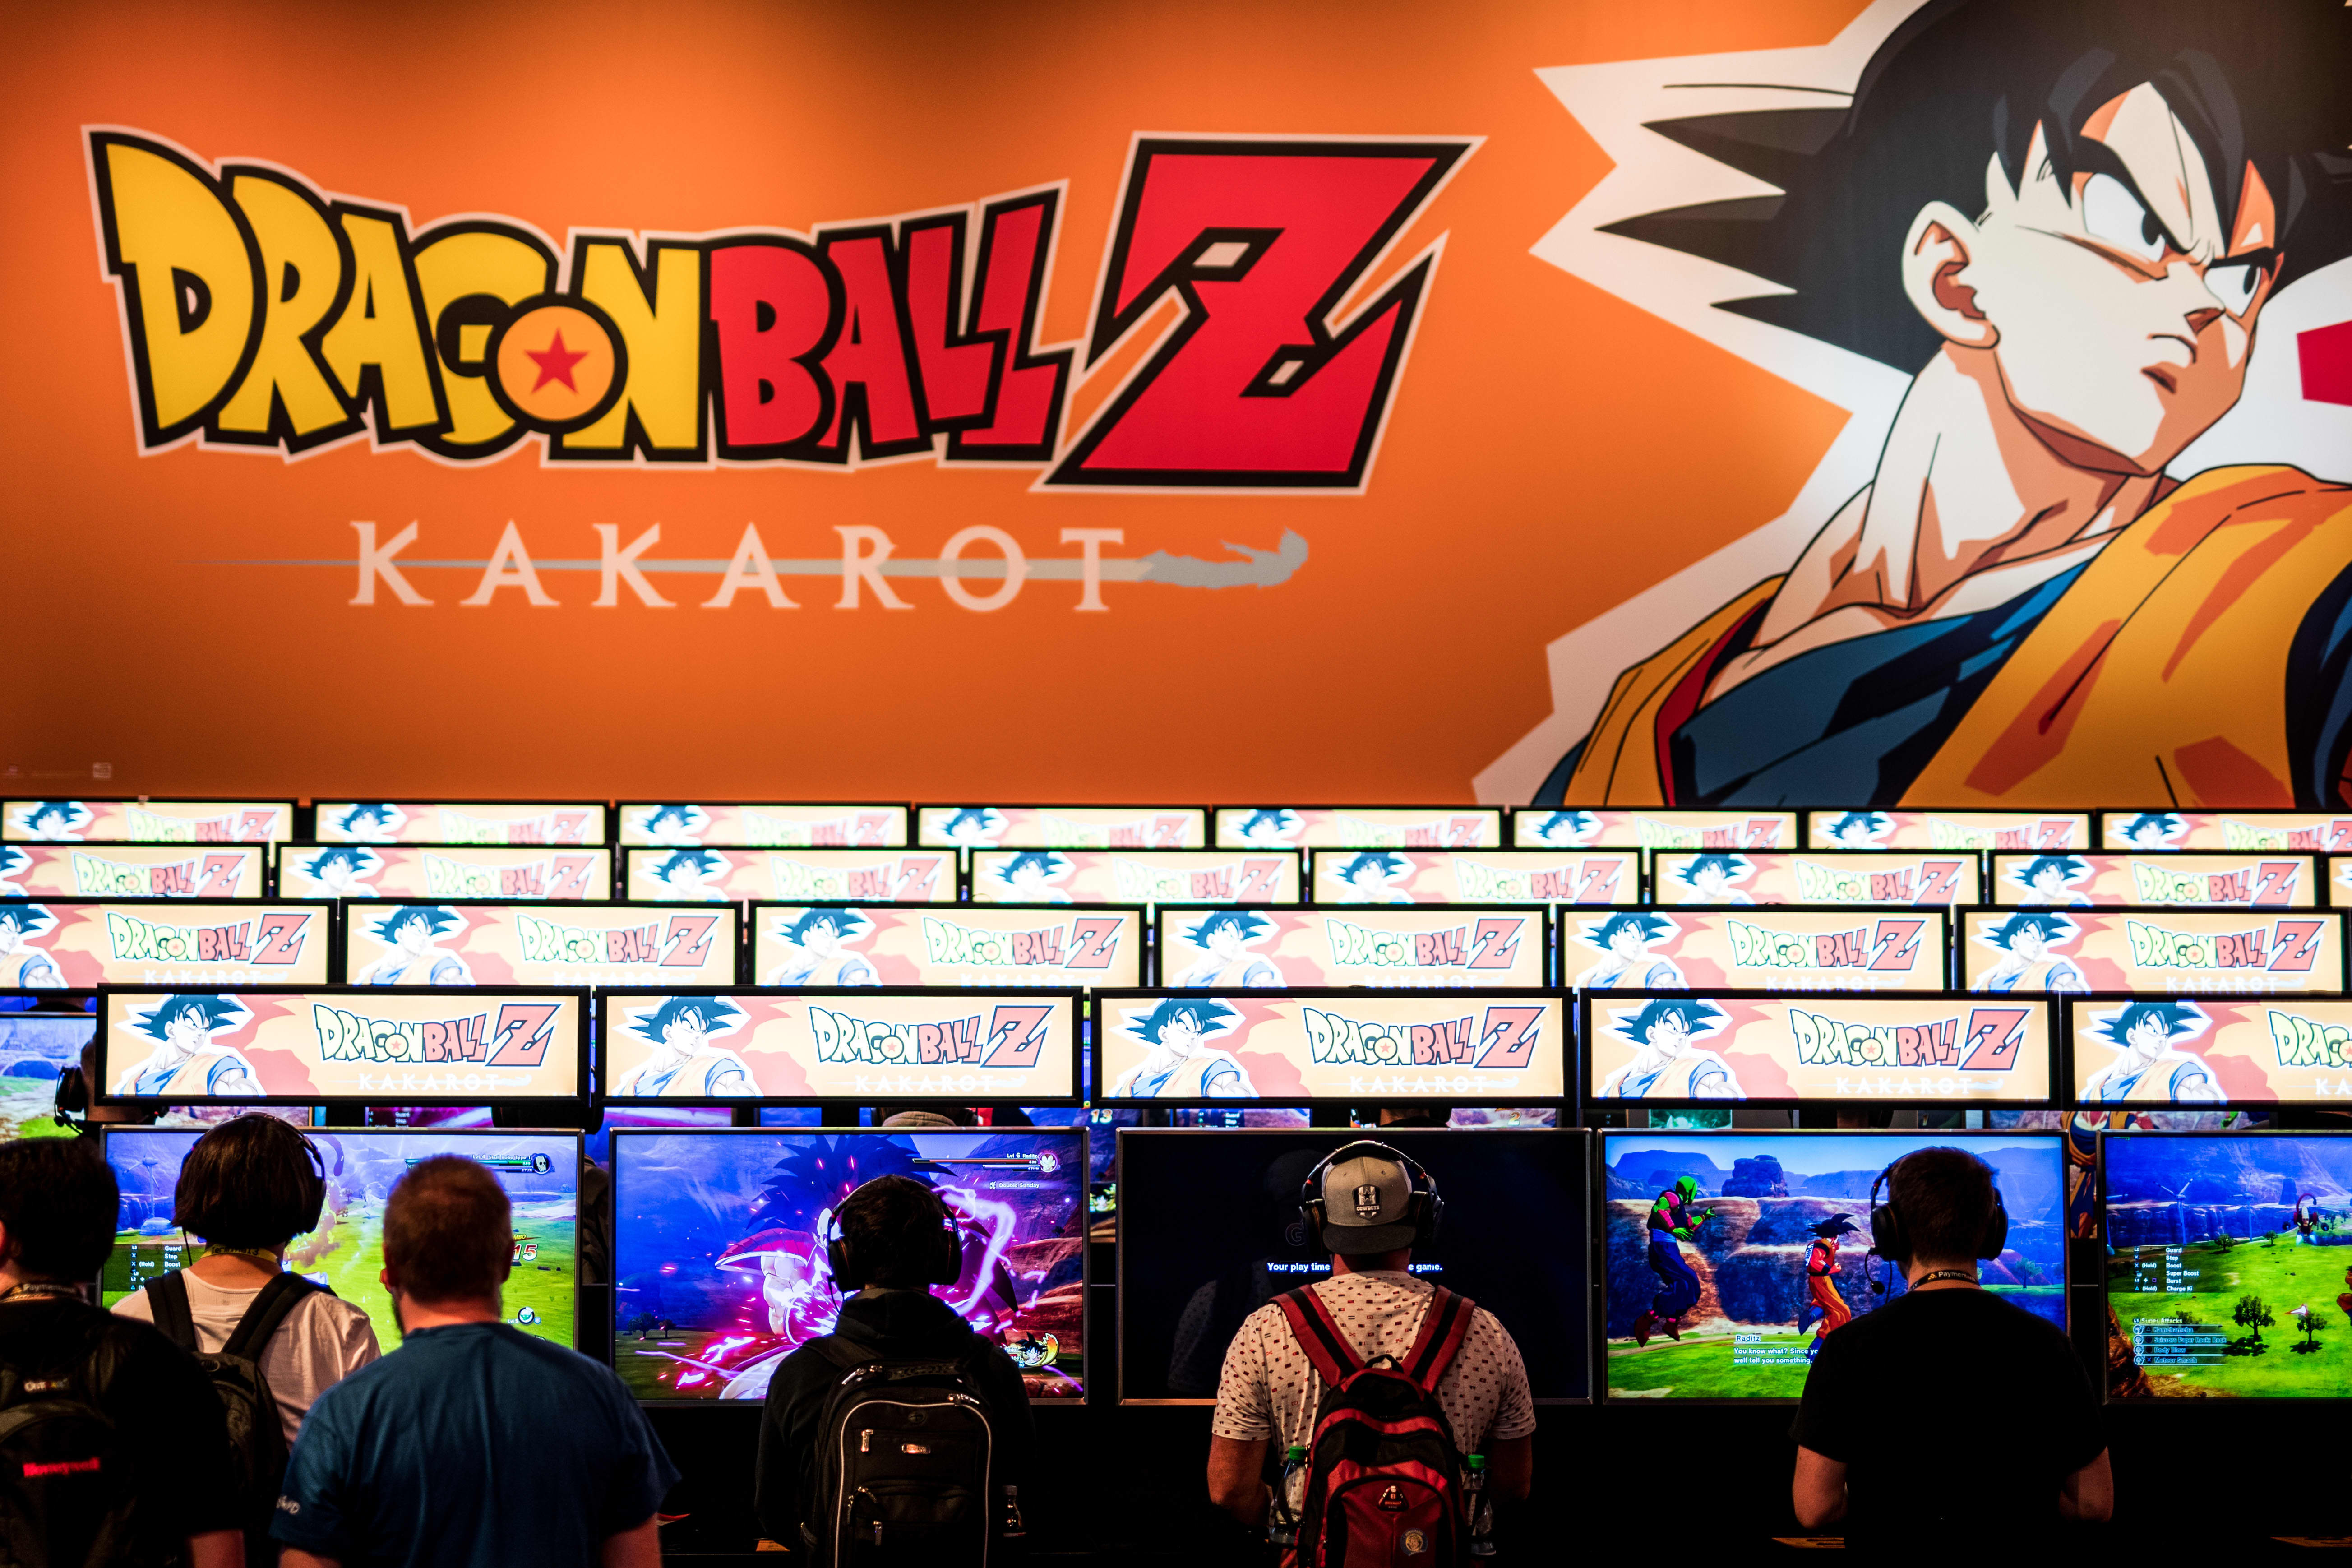 The first Dragon Ball Z theme park in the world is being constructed in Saudi Arabia.